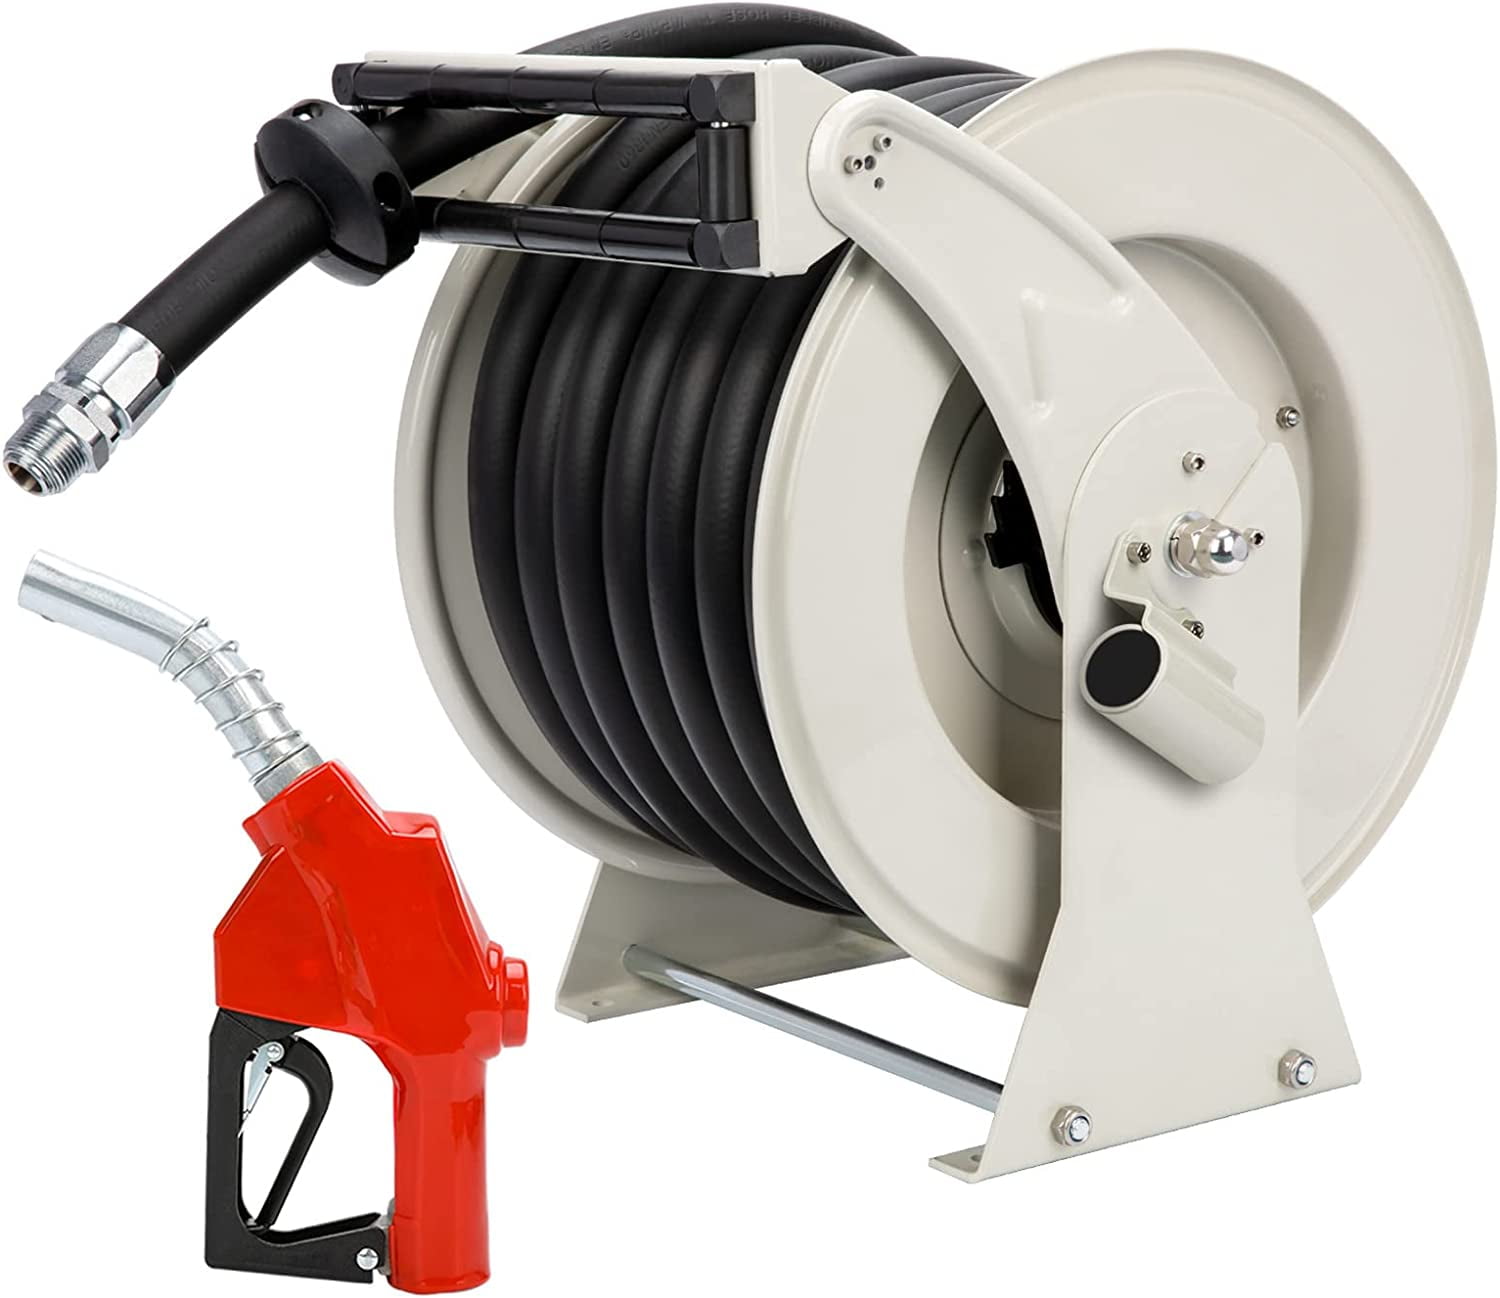 Rocita Diesel Fuel Hose Reel with Fueling Nozzle, 1 inch x 50 ft Retractable  Oil Hose Reel Hose Holder, 300 PSI Industrial Auto Hose Oil Heavy Duty Reel  for Vehicle, Motor Oil Emulsified Oil 